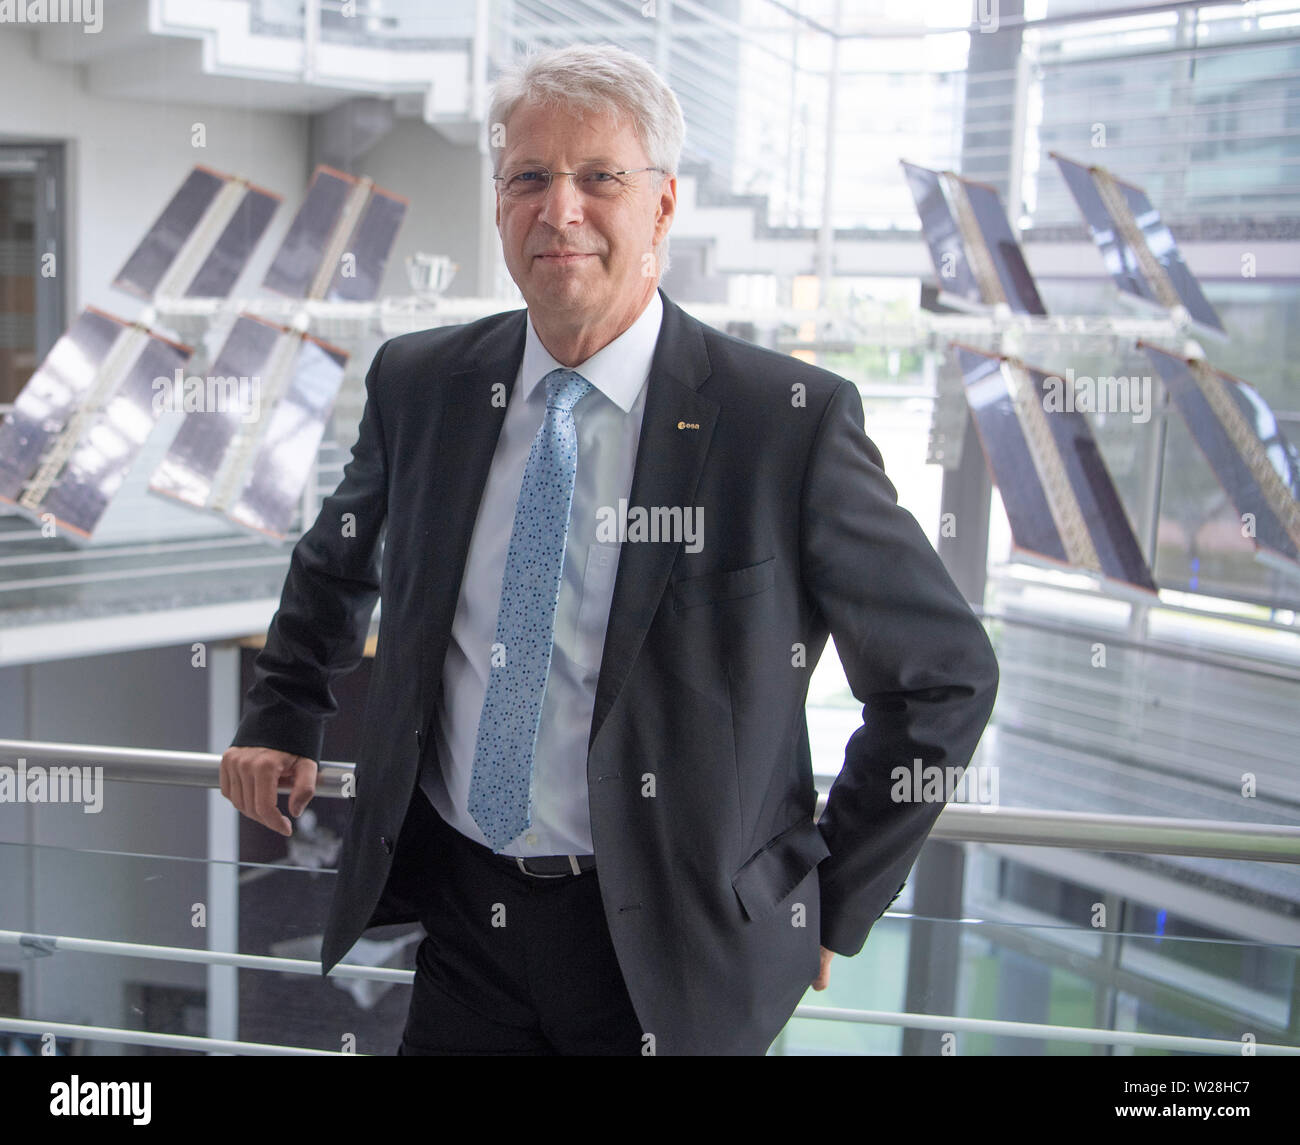 27 June 2019, Hessen, Frankfurt/Main: Former astronaut Thomas Reiter stands in the foyer of ESA. The moon landing 50 years ago was a key experience for Thomas Reiter. (to dpa-lhe 'Apollo 11 inspired German astronauts: From Neu-Isenburg into space') Photo: Boris Roessler/dpa Stock Photo